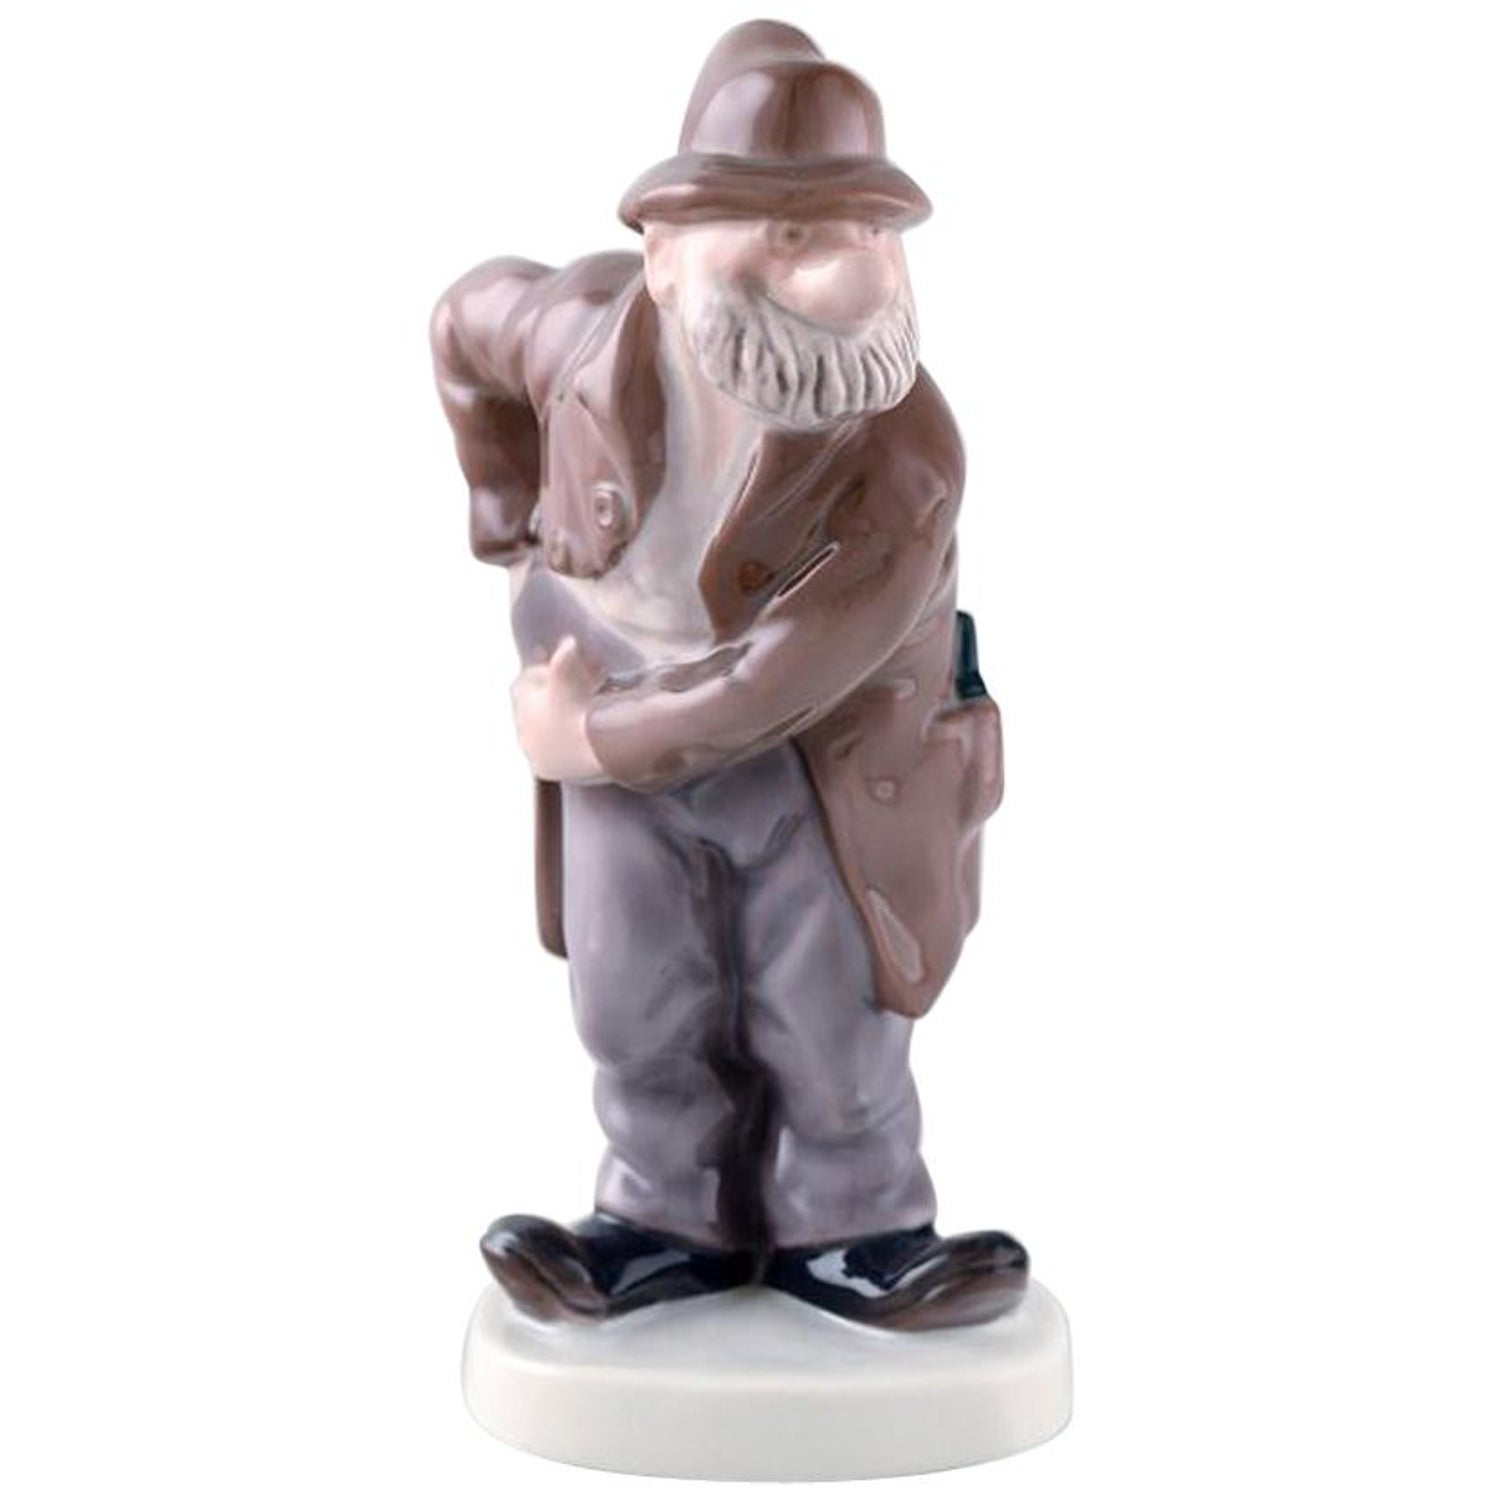 Bing Grondahl porcelain Pericles Vagabond, after P. For Sale at 1stDibs